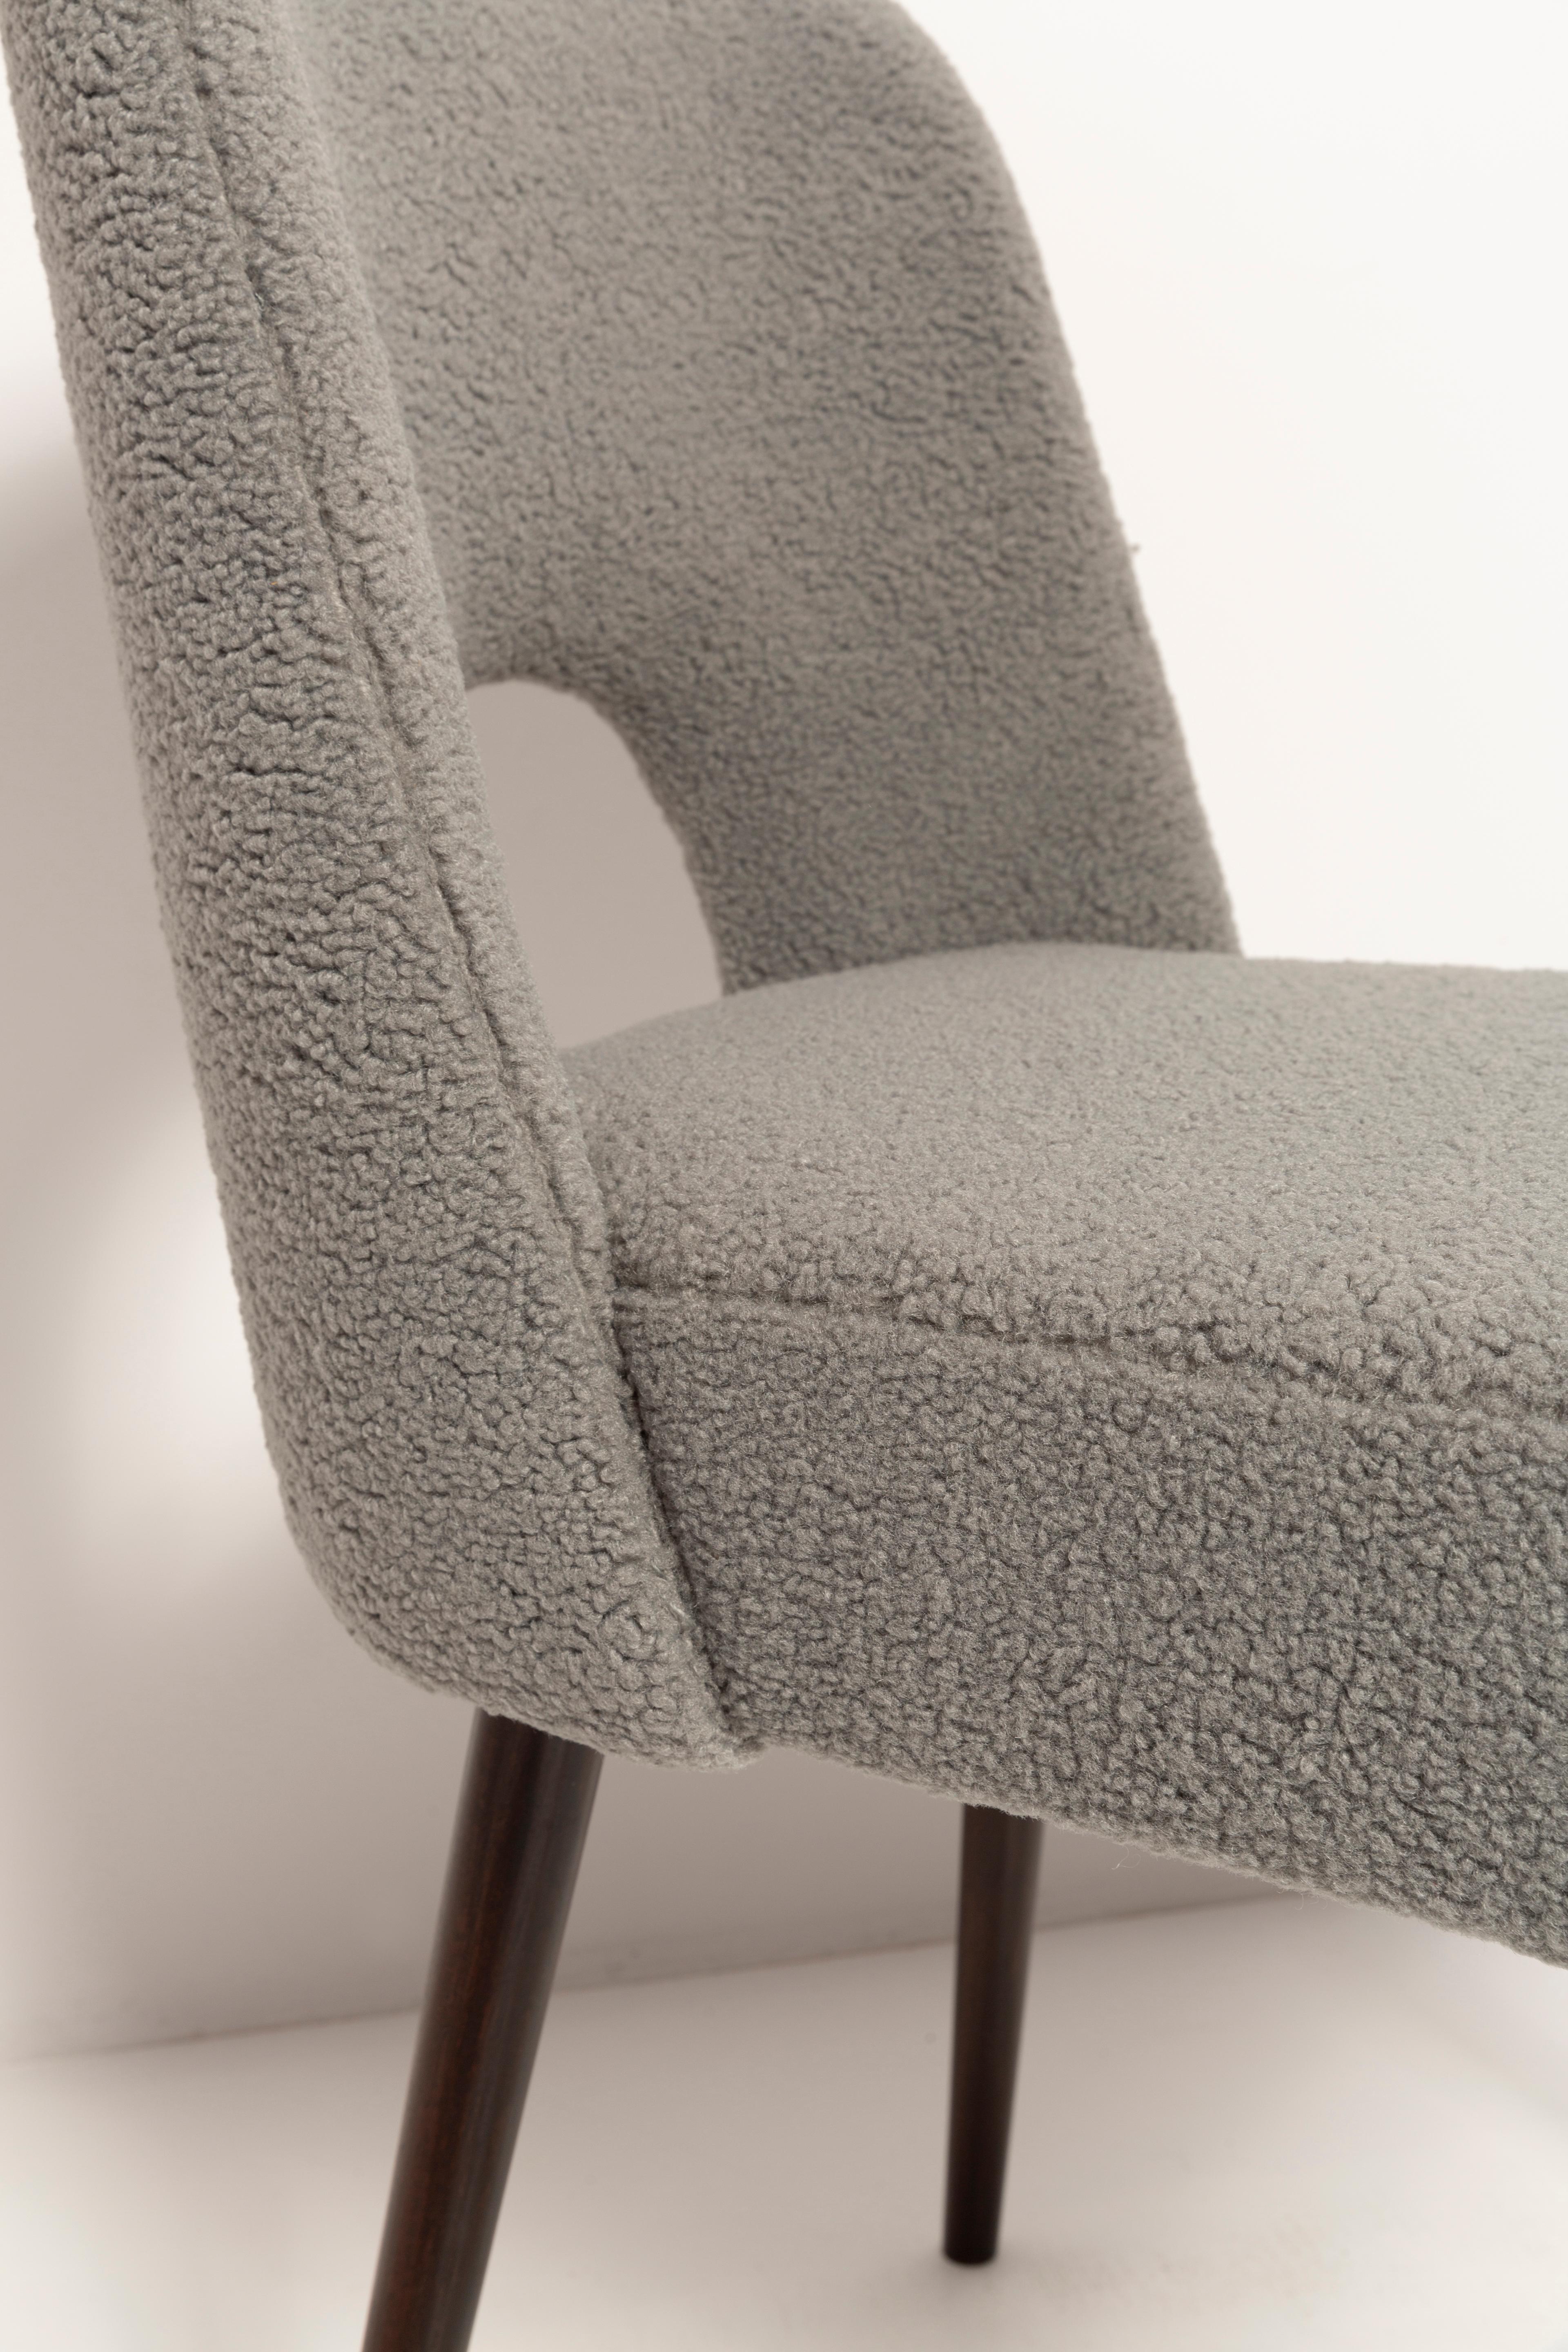 Hand-Crafted Set of Seven Gray Boucle 'Shell' Chairs, Dark Beech Wood, Europe, 1960s For Sale